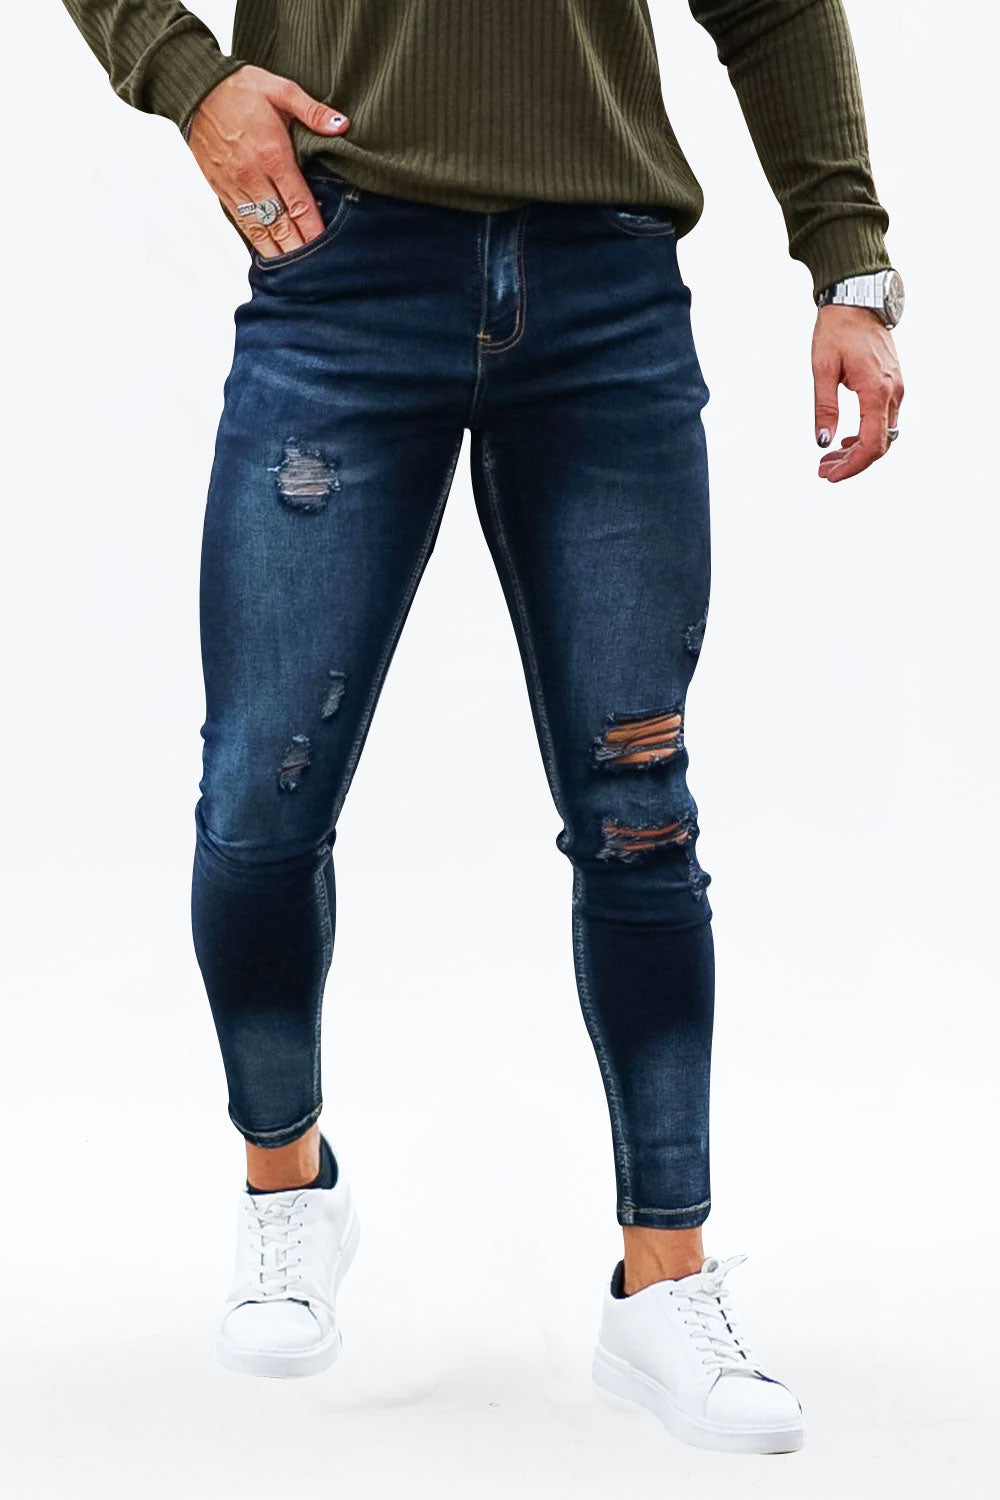 Gingtto Restoring Ancient Jeans Skinny Ripped Jeans-Dark Blue